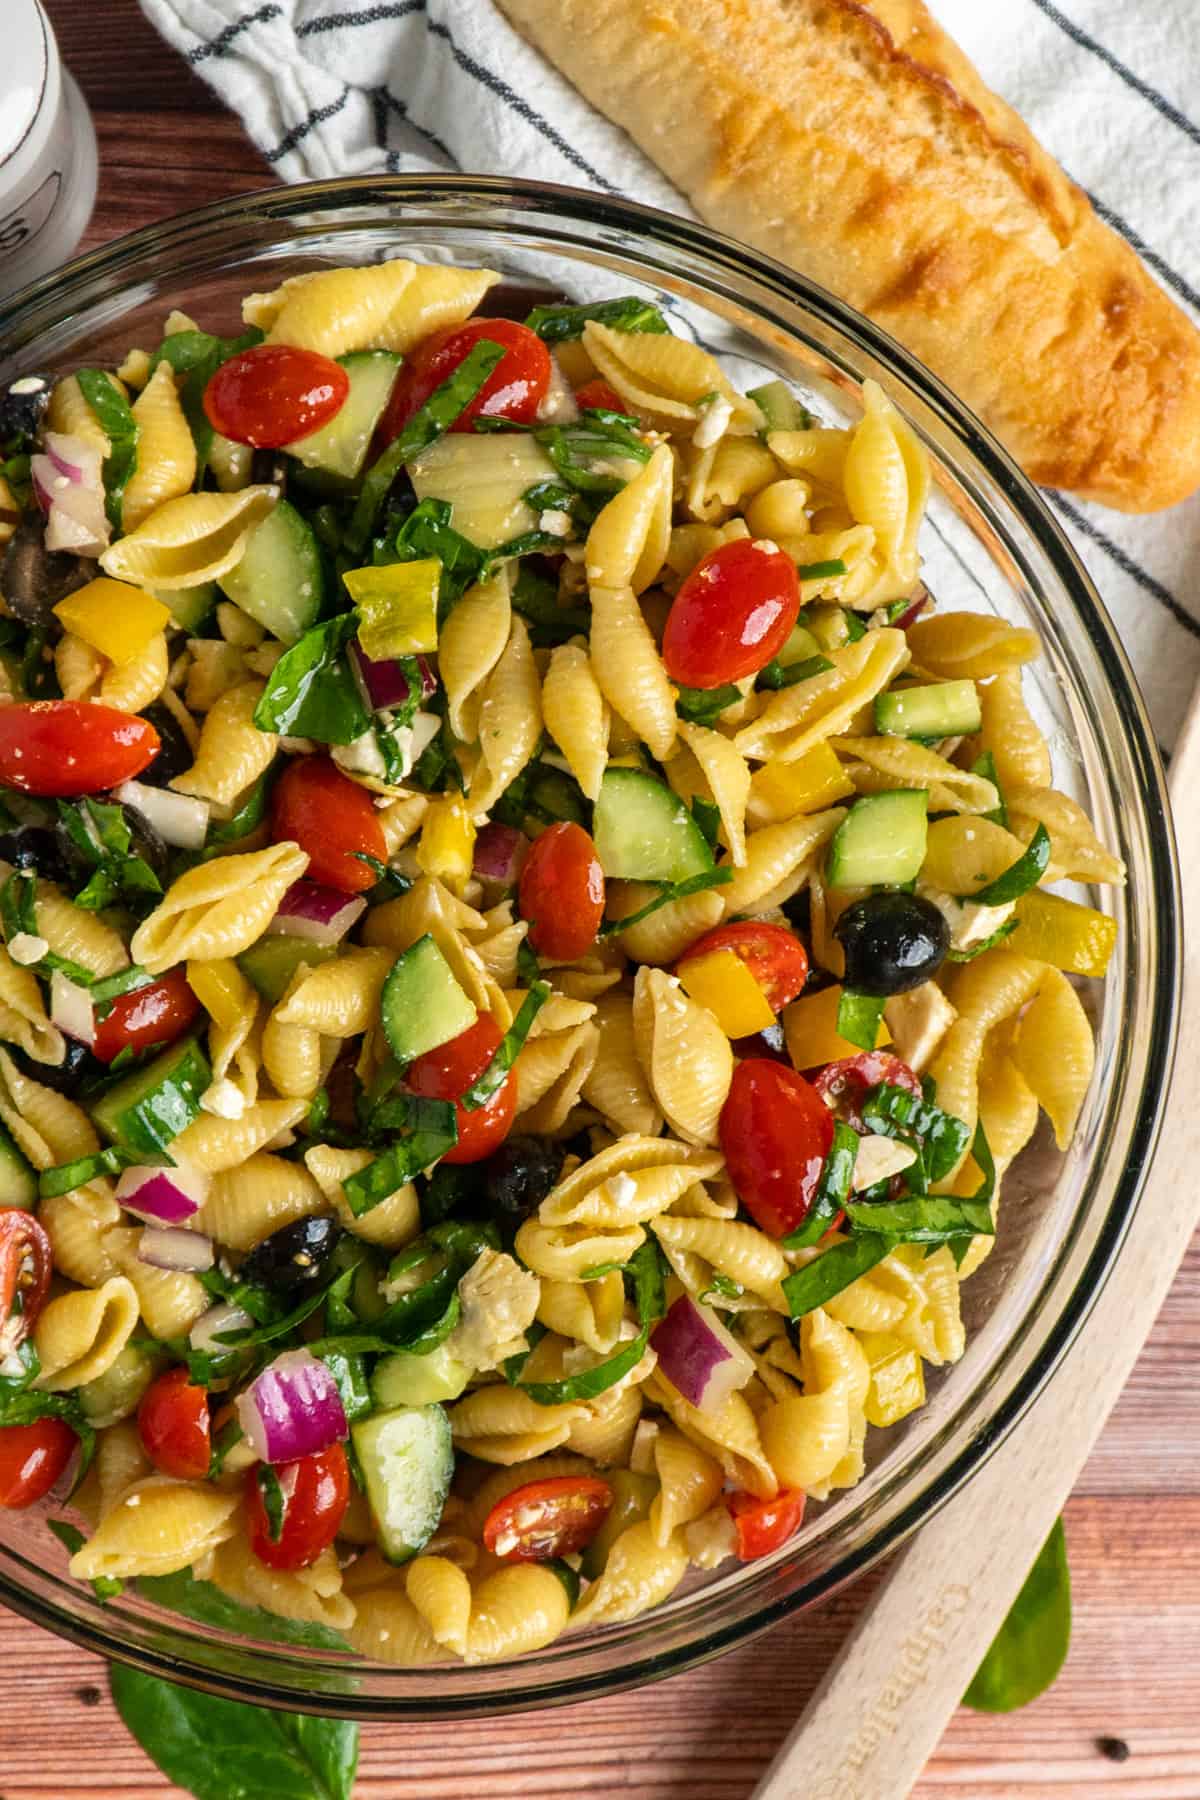 Balsamic pasta salad in a clear bowl.